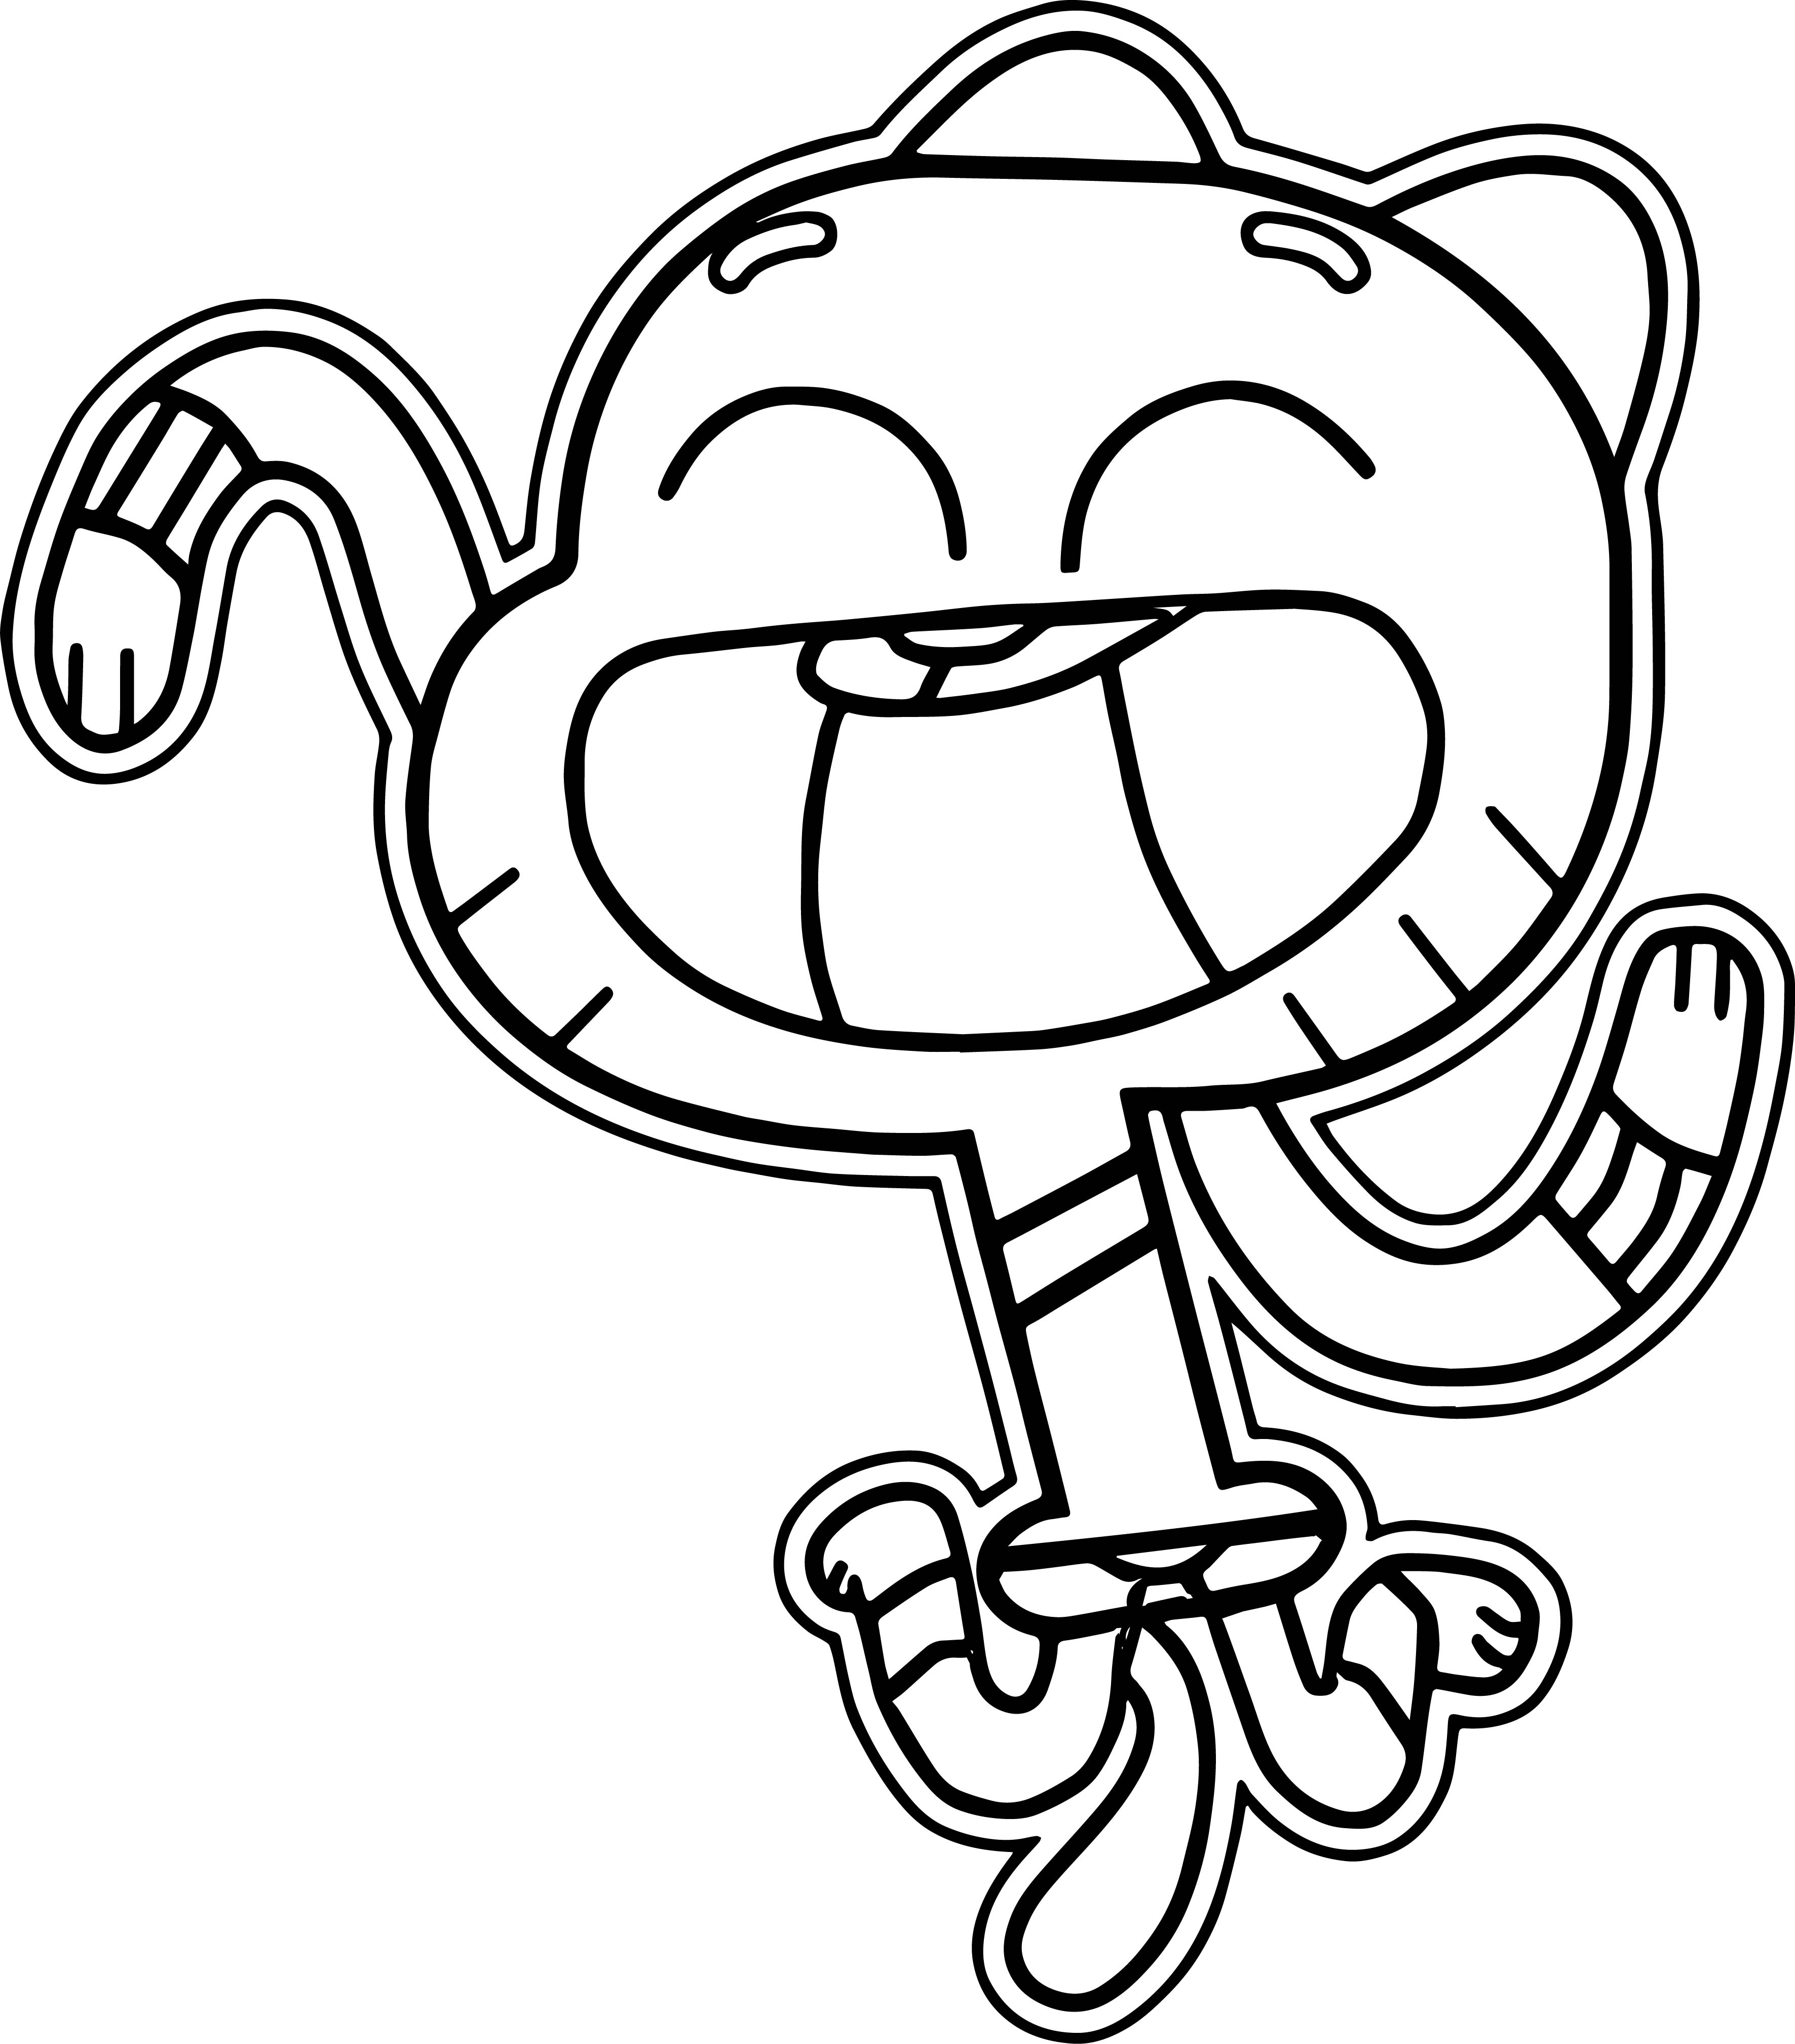 The Amazing World Of Gumball Characters Coloring Pages Coloring Pages